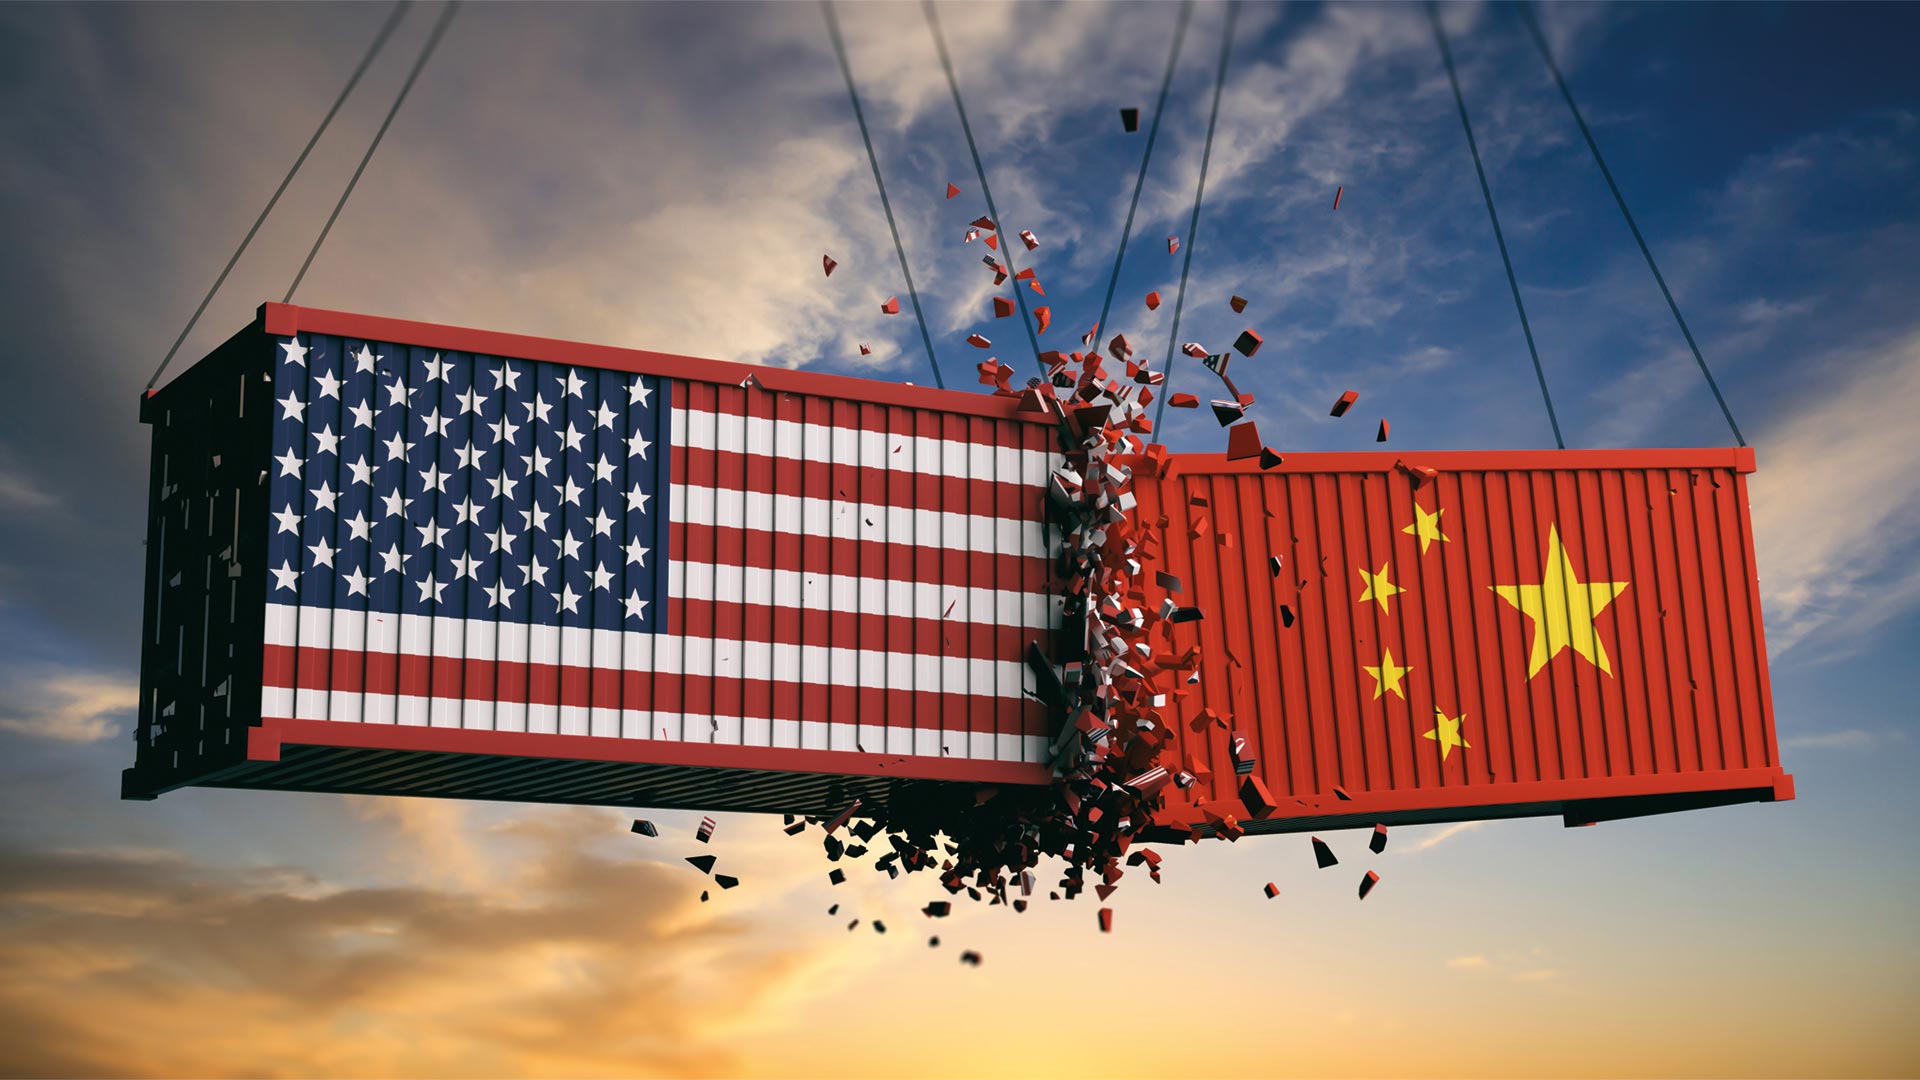 Two containers hitting each other. One symbolises the US and the other China